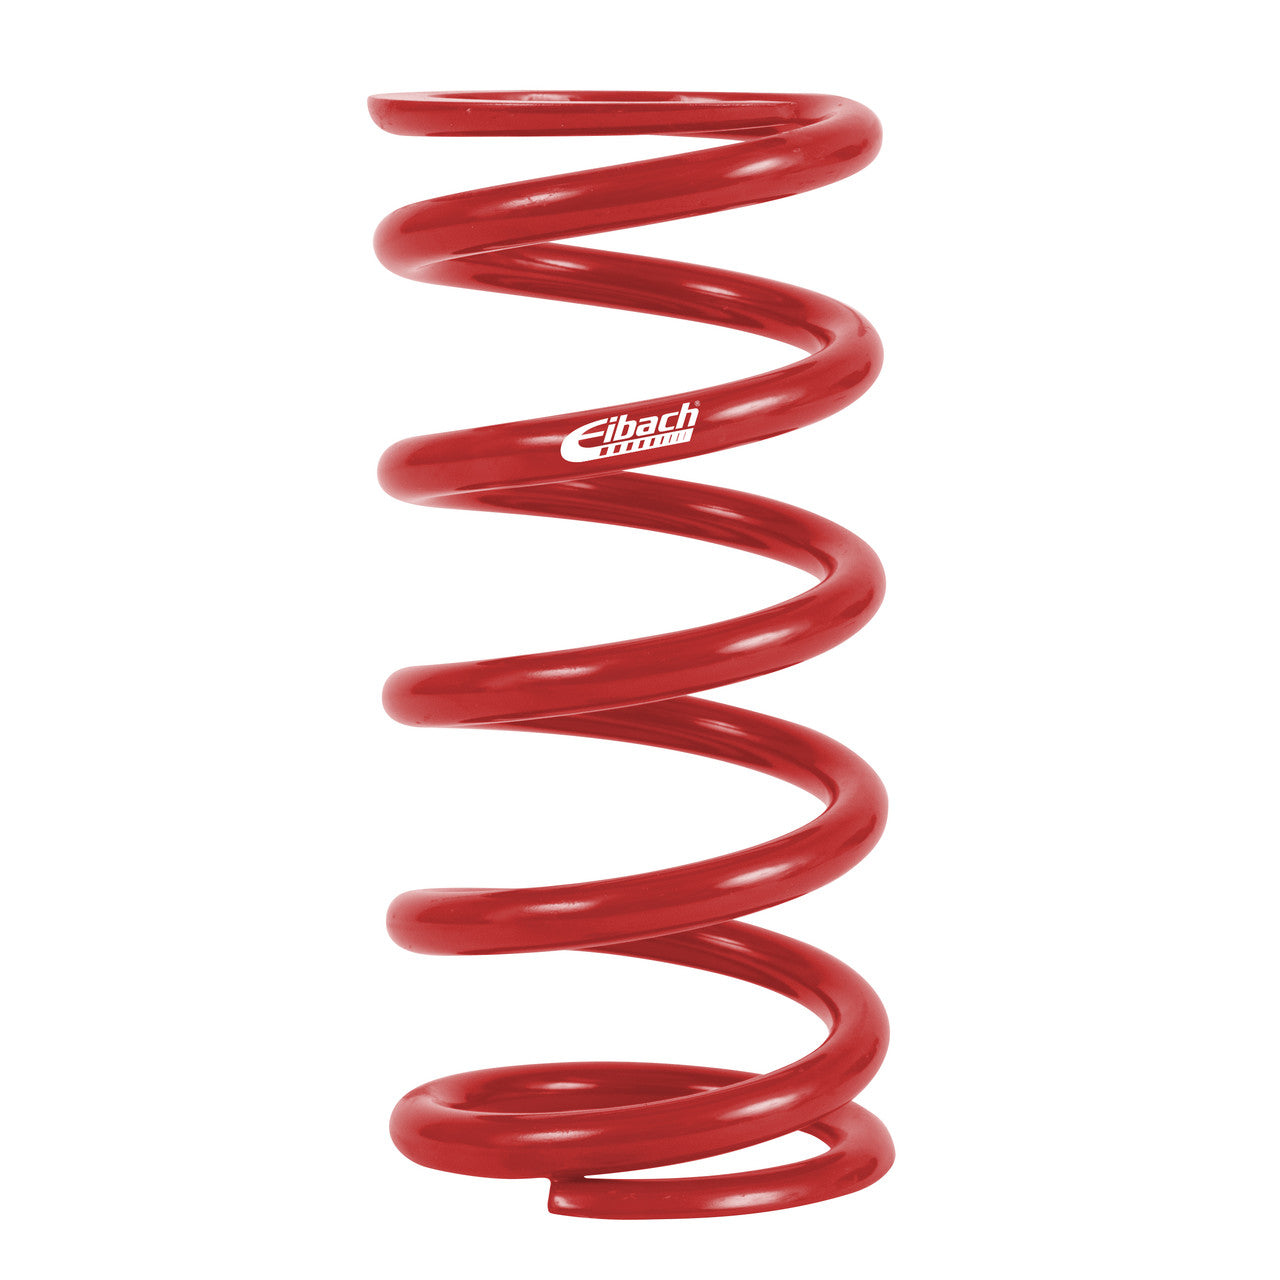 Eibach Metric Coilover Spring - 70MM I.D. 250-70-0040